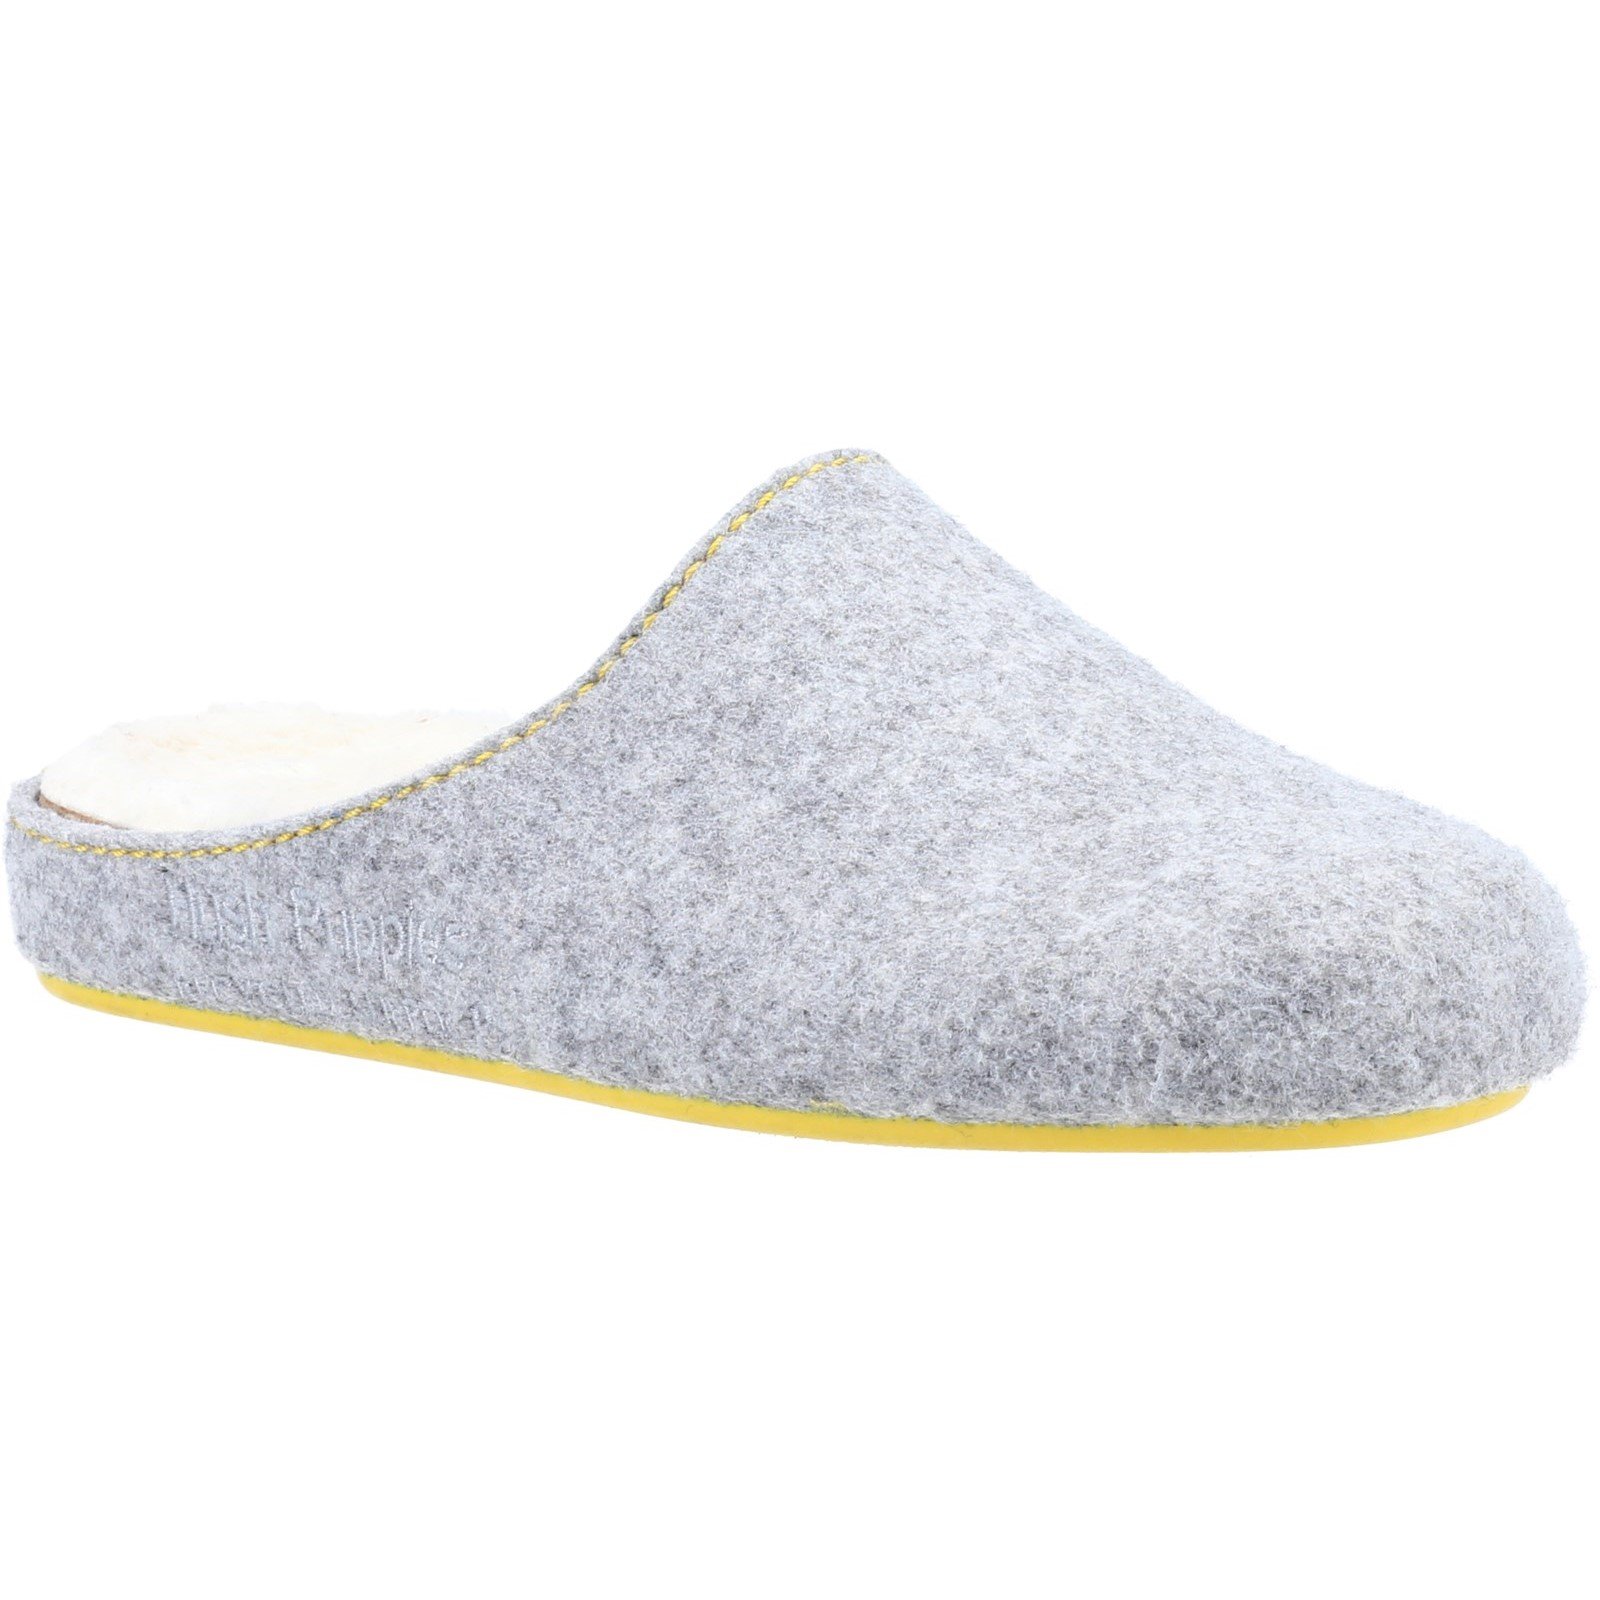 Hush Puppies Women's Remy Slipper Various Colours 32853 - Grey 6